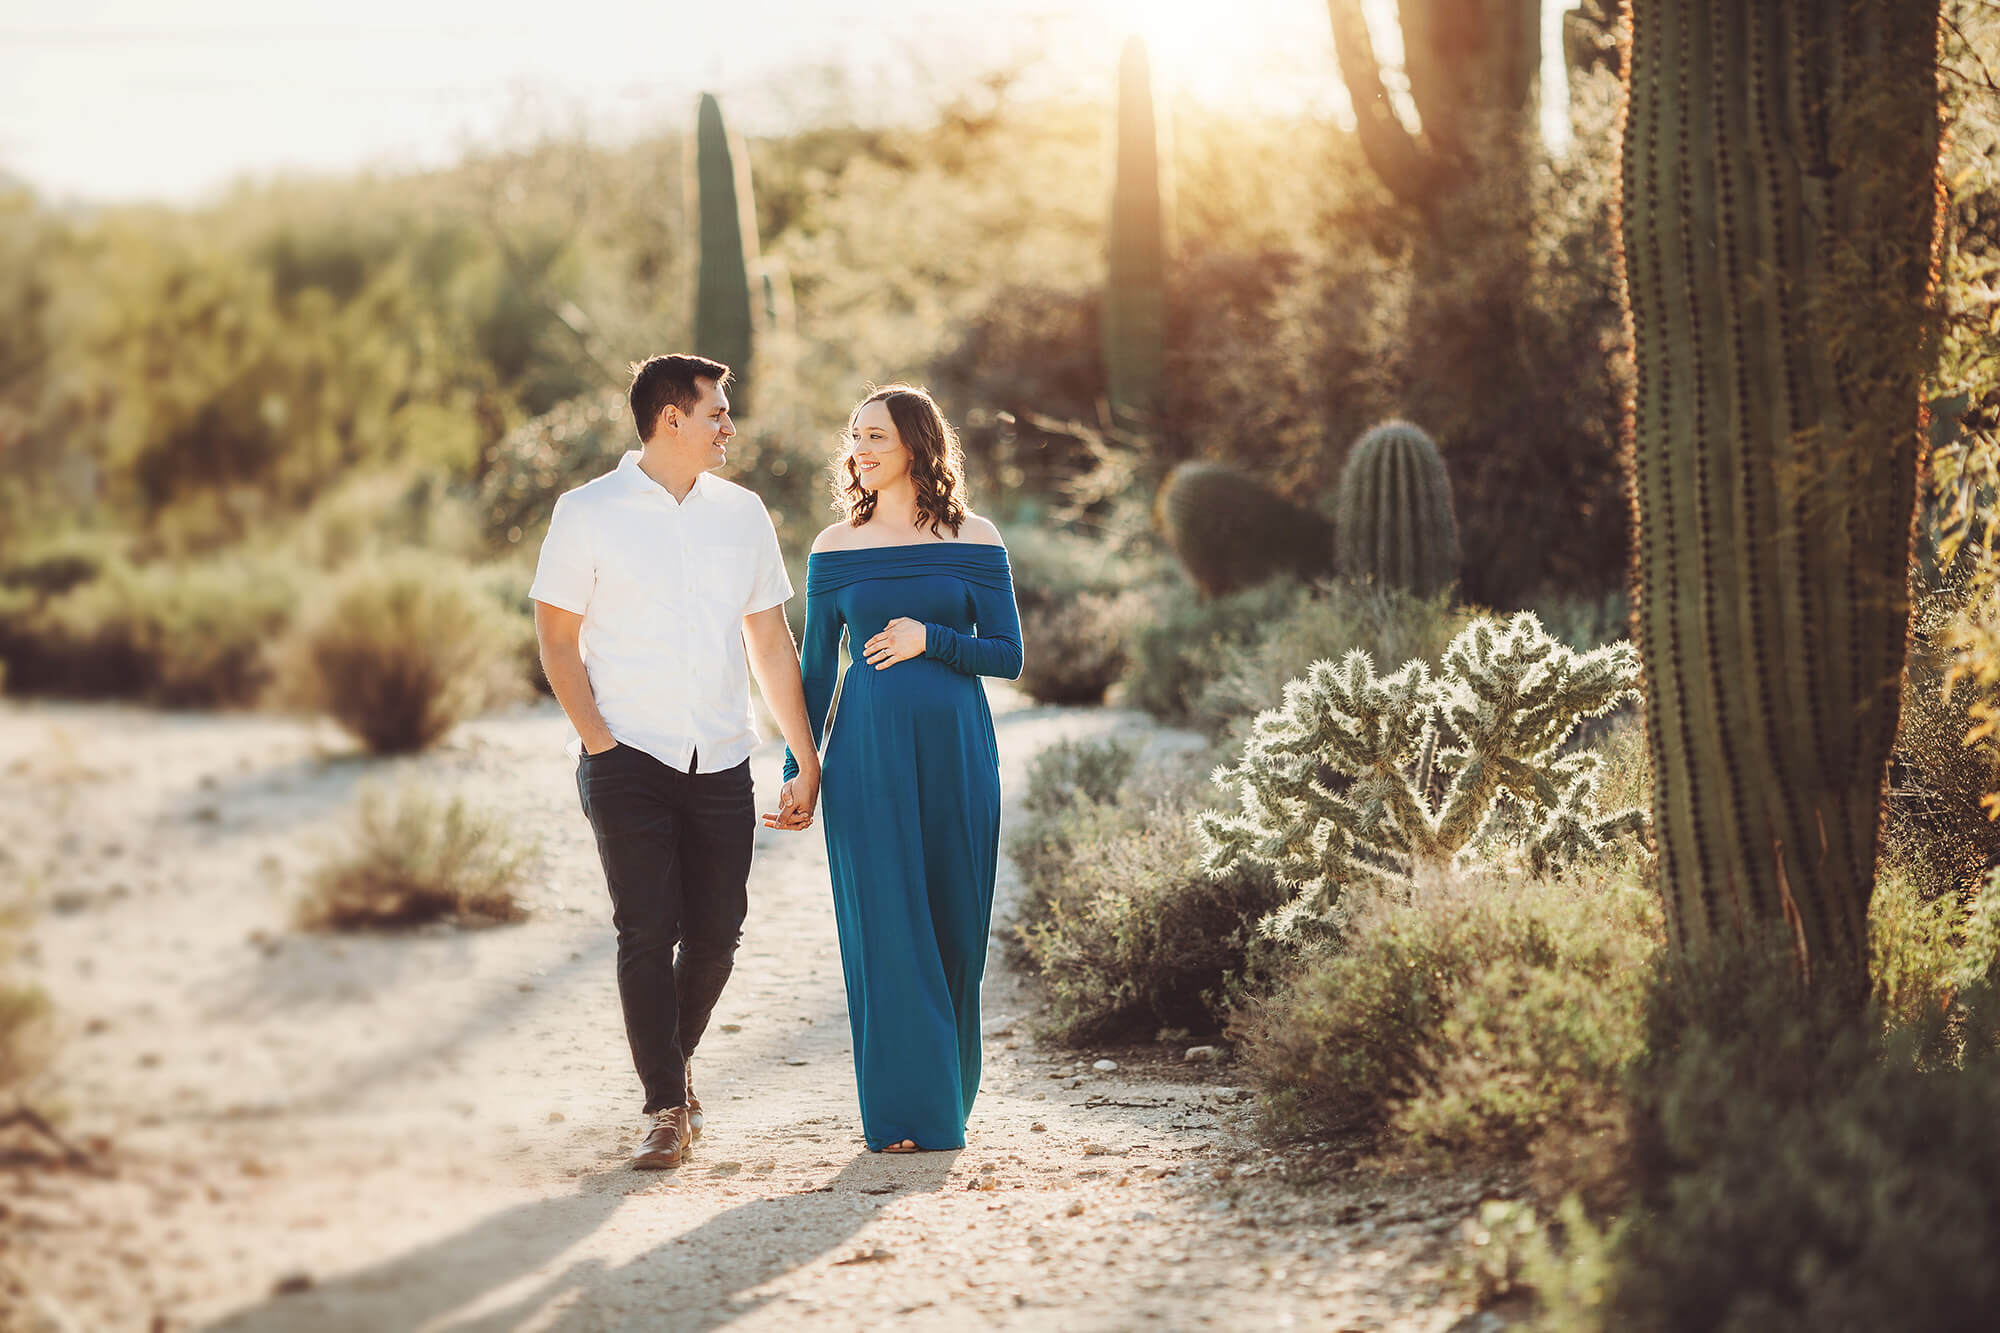 A sweet walk for mom and dad during their Sabino maternity session